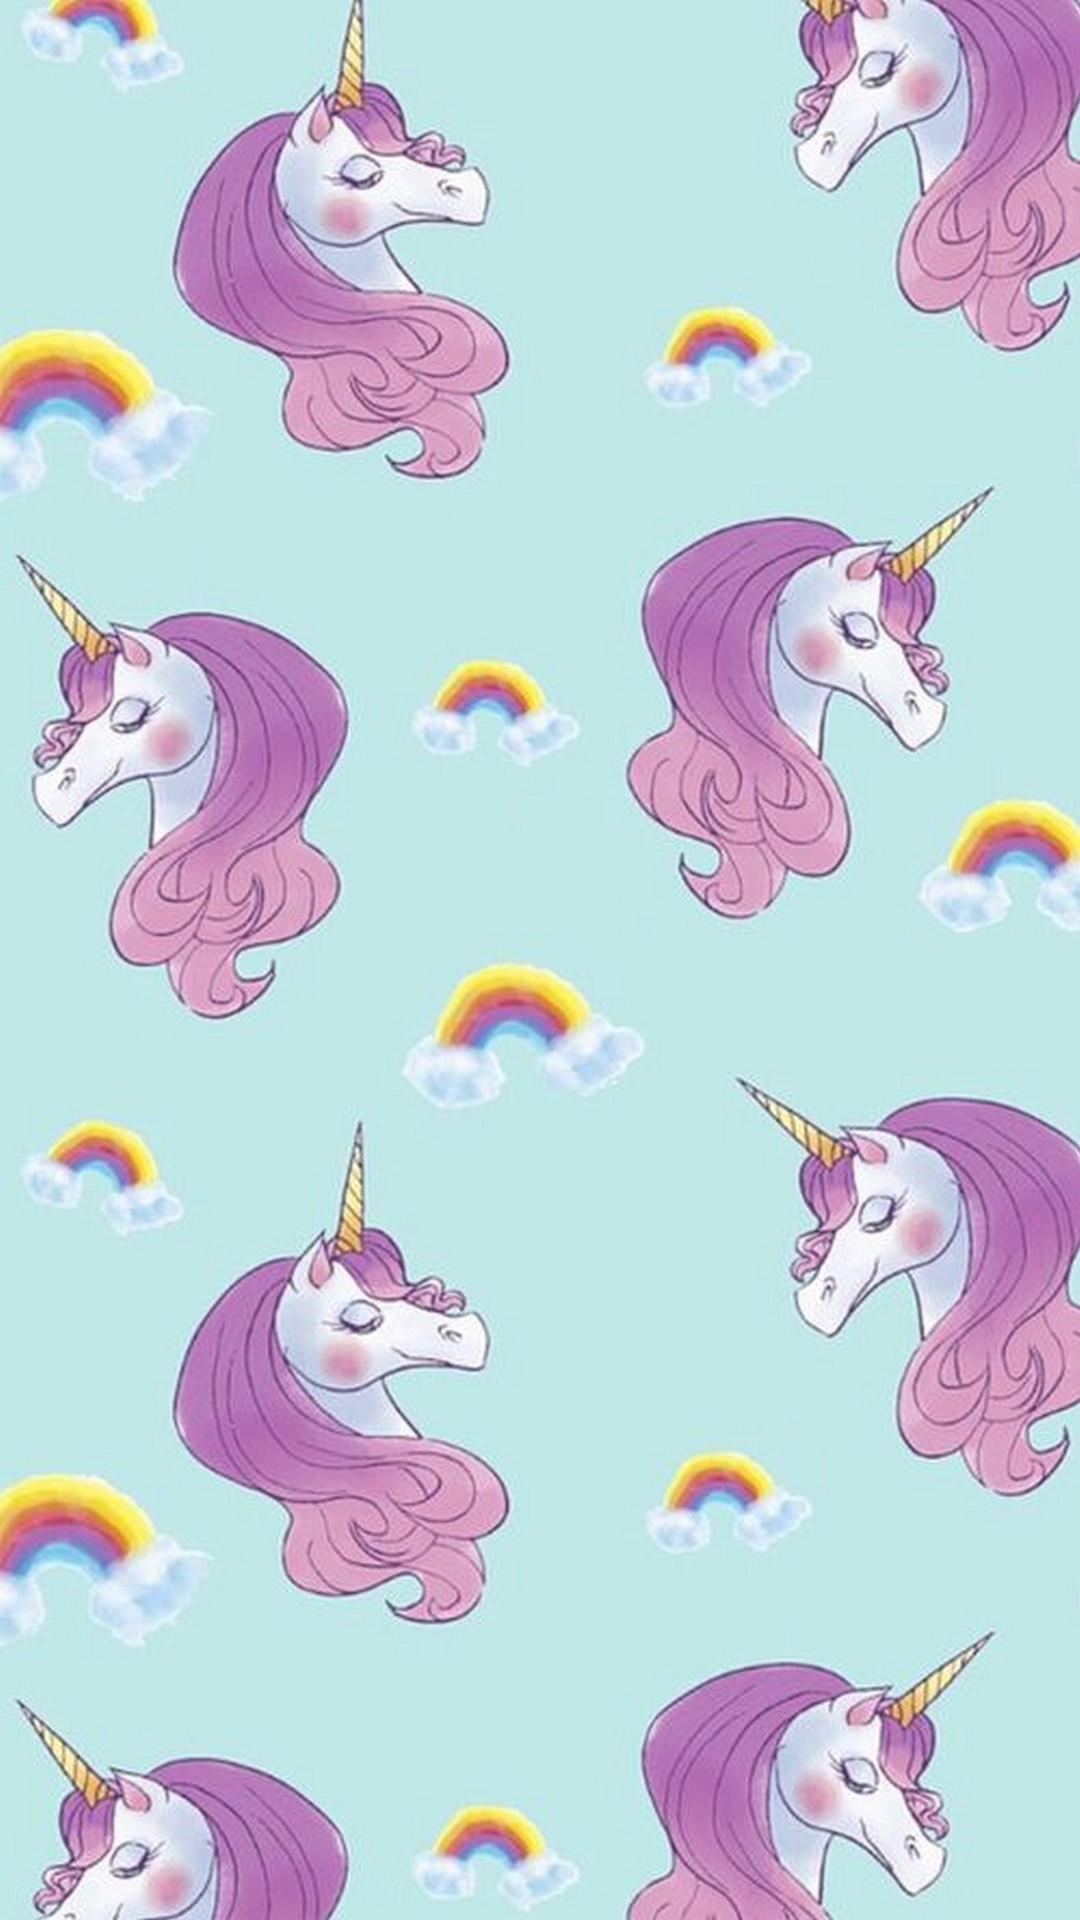 Android Wallpaper Hd Cute Unicorn 2020 Android Wallpapers